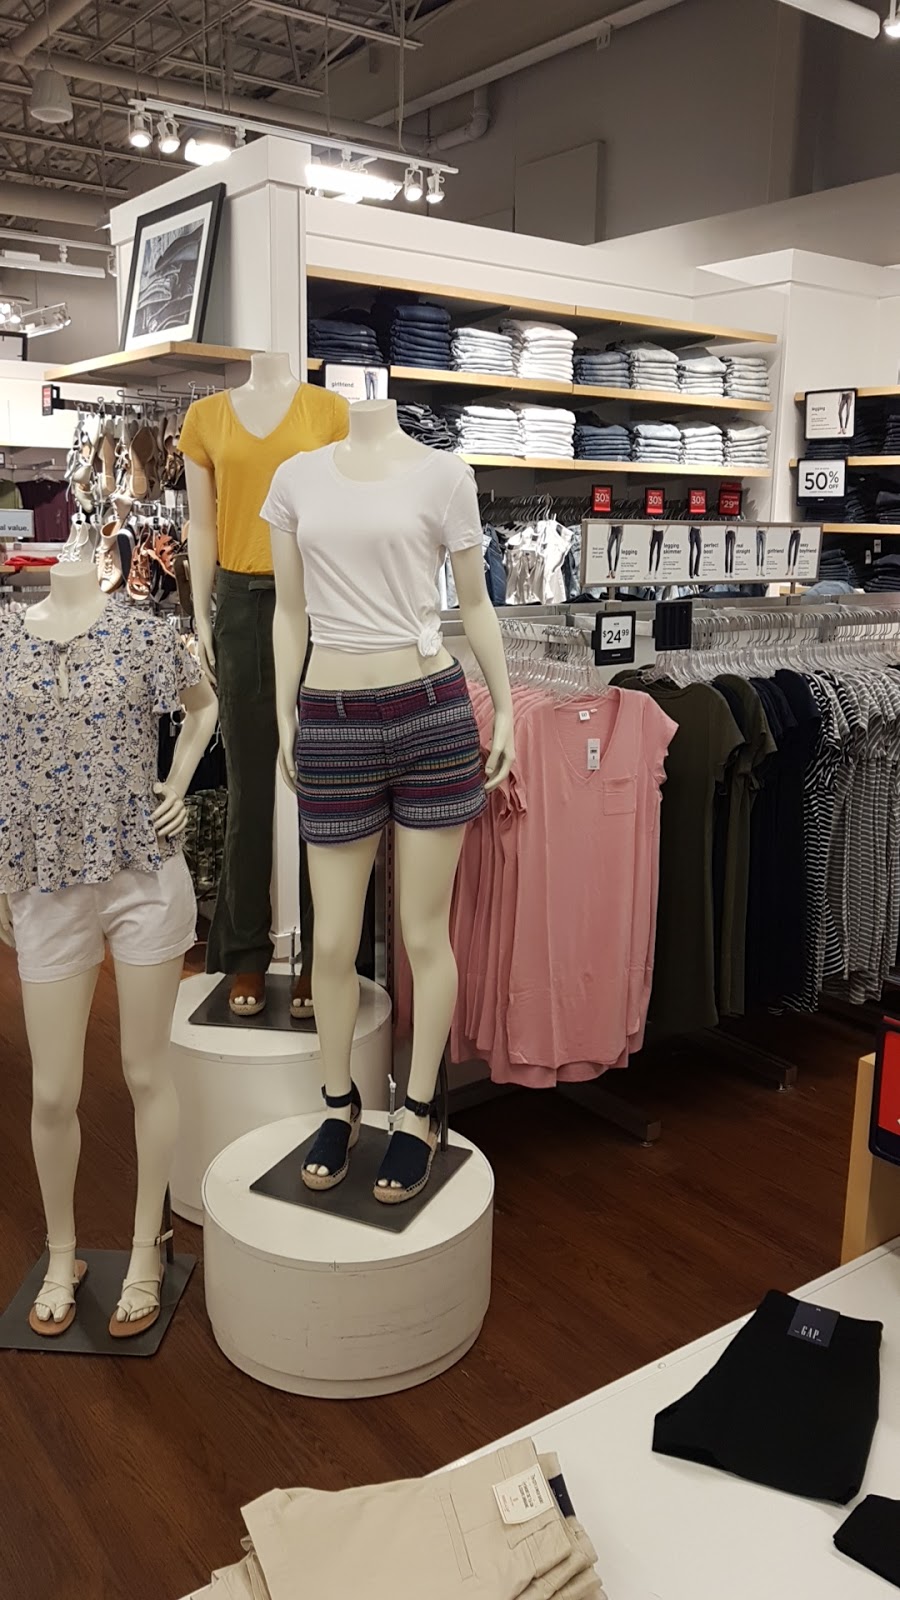 Gap Outlet | 3311 Simcoe 89 f01, Cookstown, ON L0L 1L0, Canada | Phone: (705) 458-2026